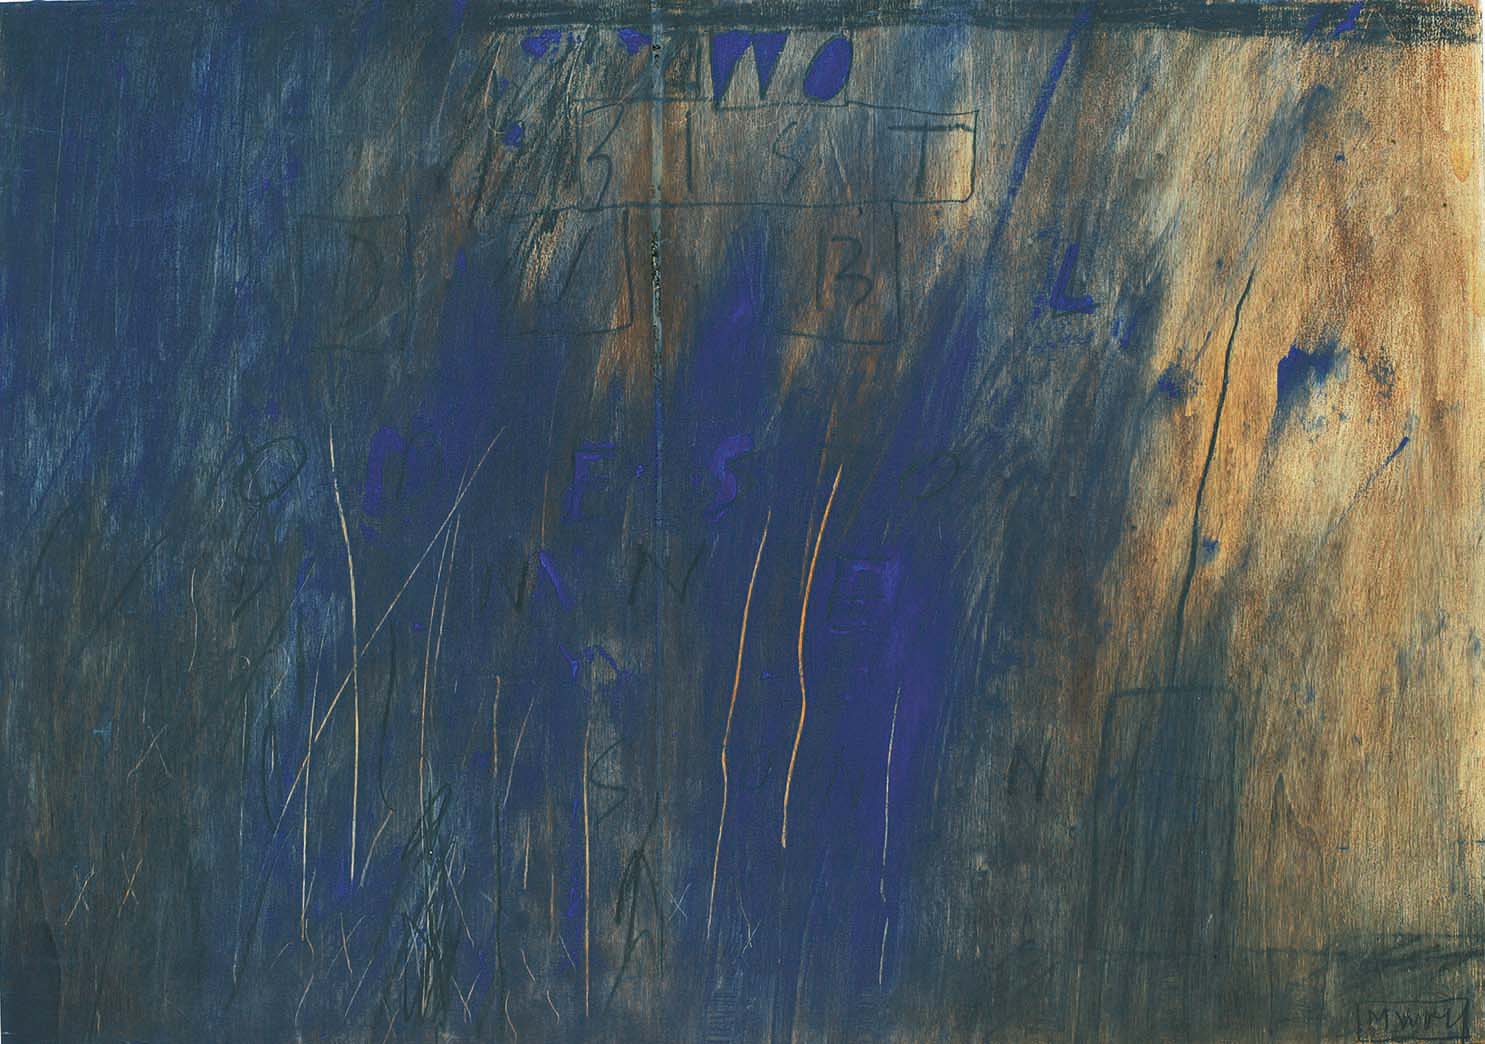 Wo bist du blöde Sonne - Where are you stupid Sun, 2001 - oil and pencil on plywood, cm 43x61